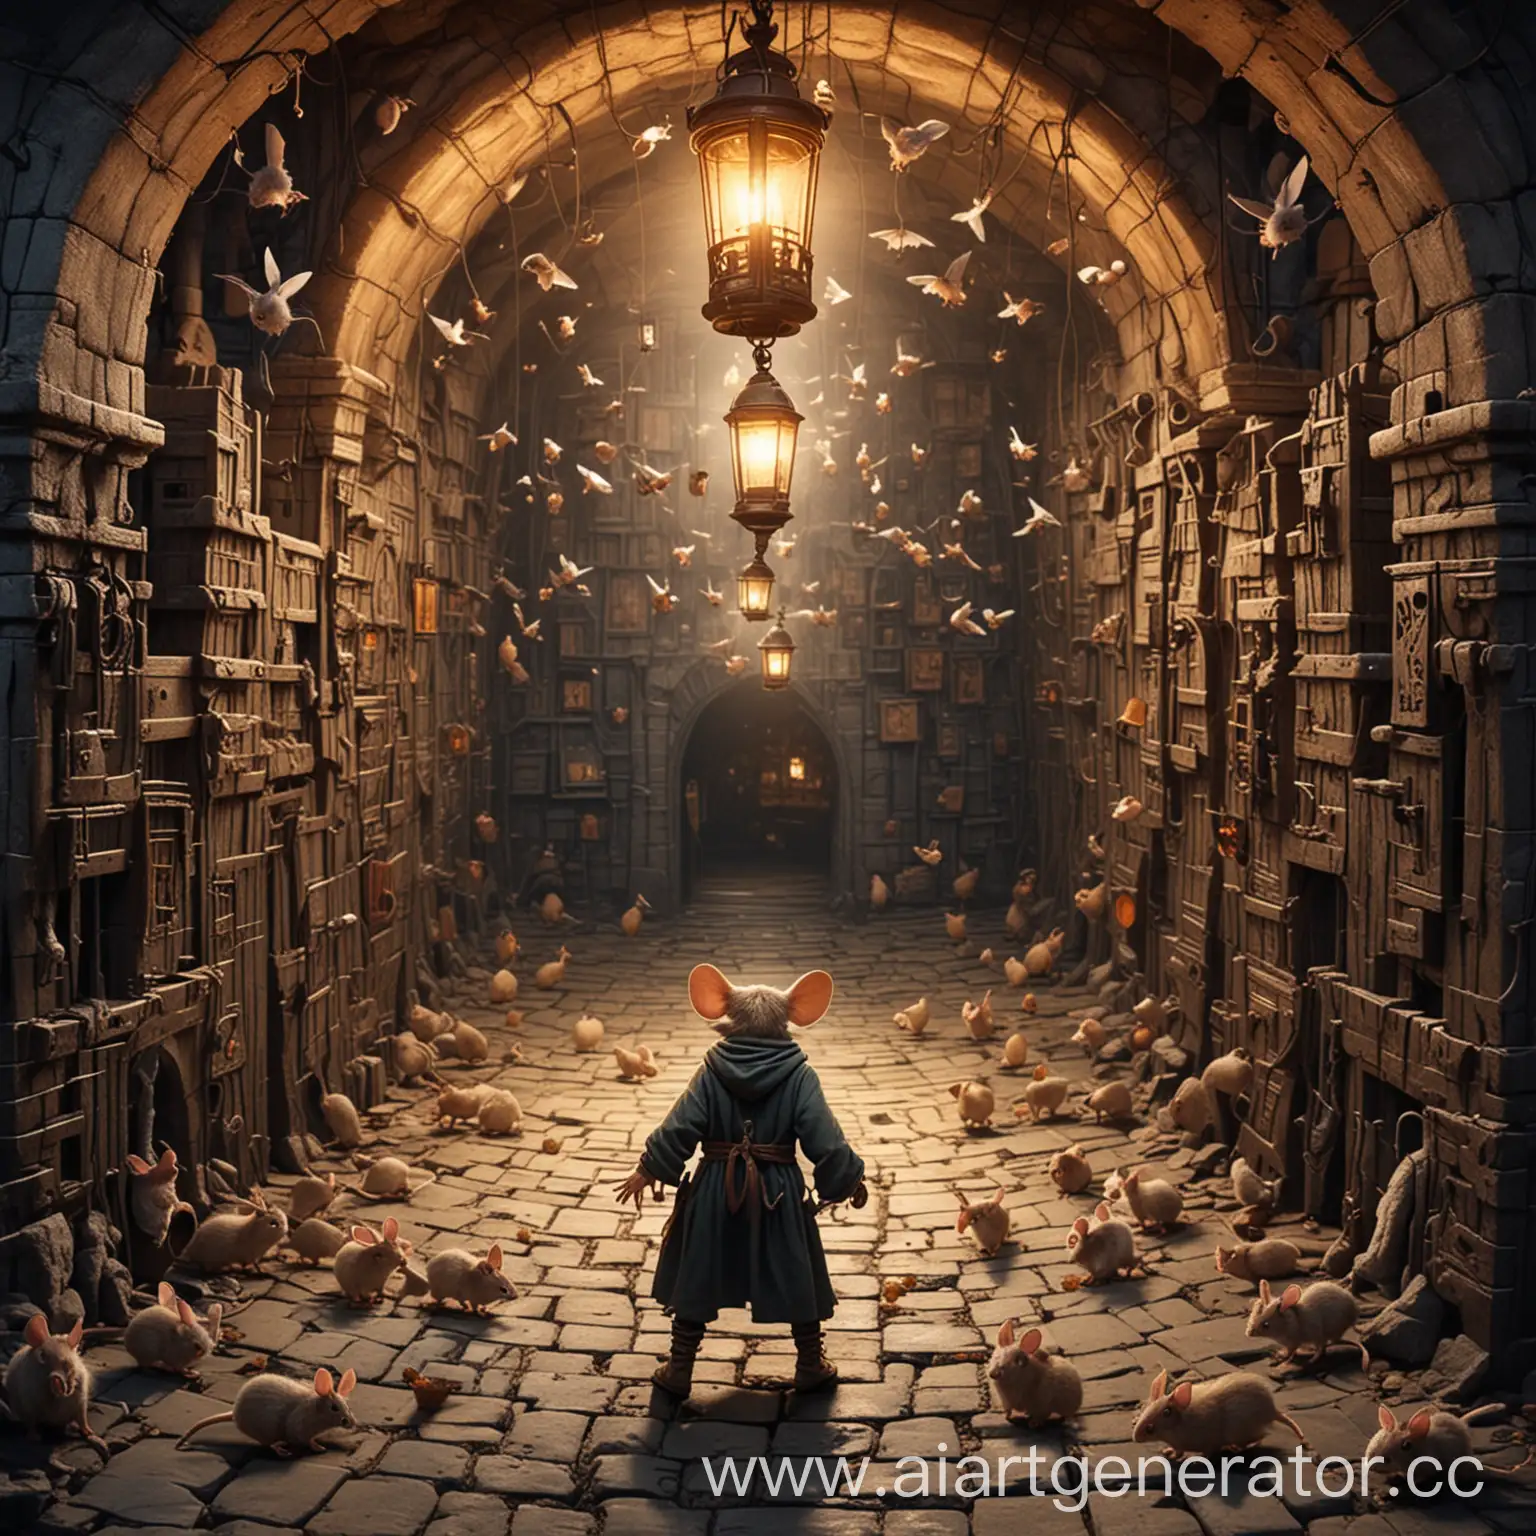 Exploring-a-Mystical-Labyrinth-Dungeon-with-Hovering-Mice-and-a-LanternBearing-Adventurer